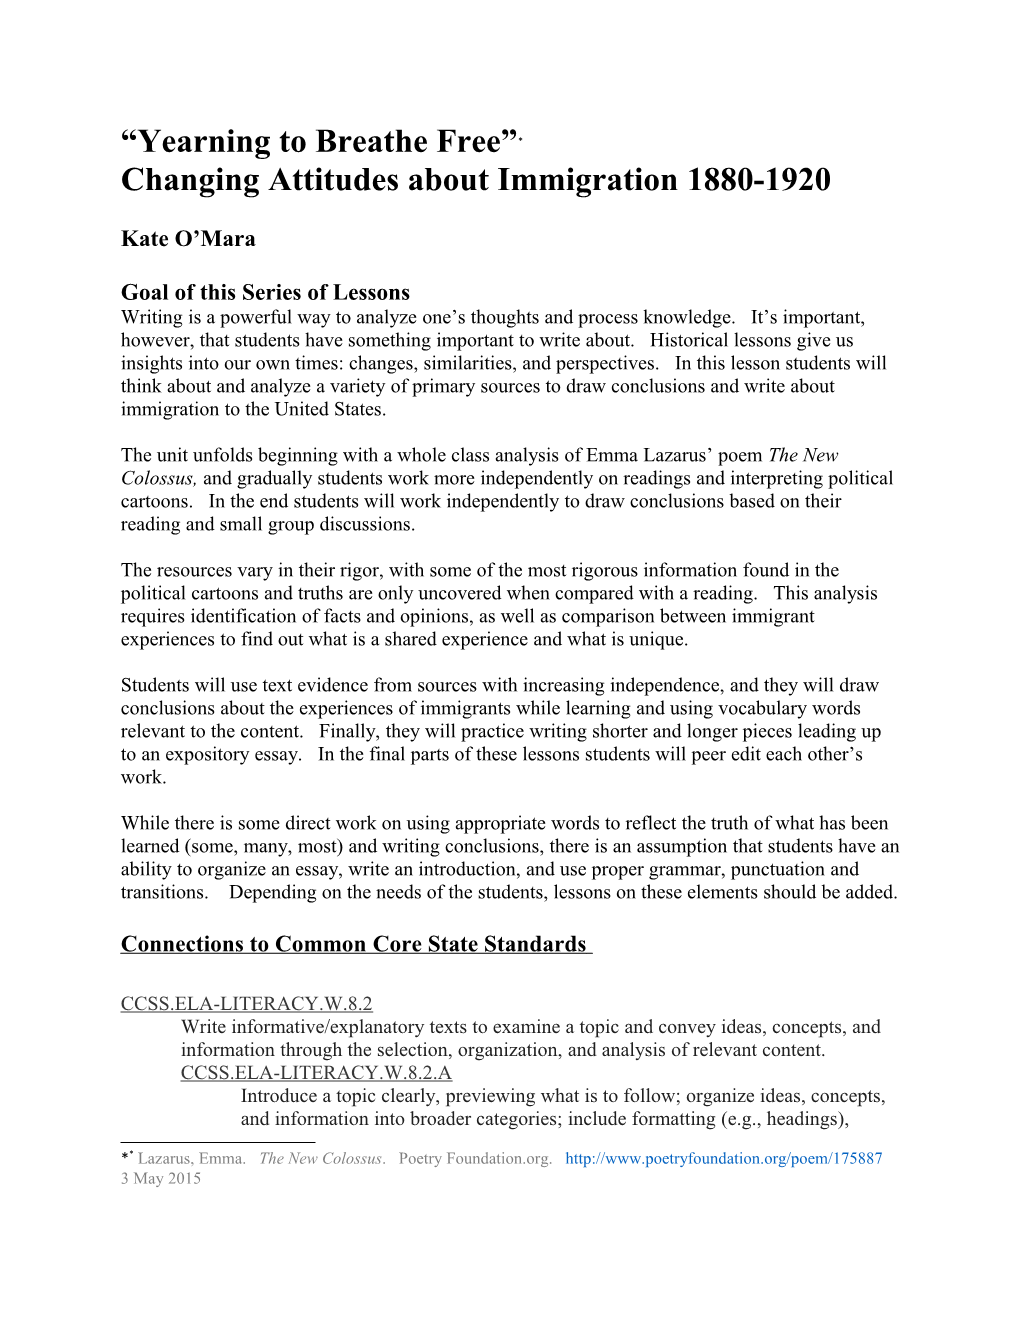 Changing Attitudes About Immigration 1880-1920